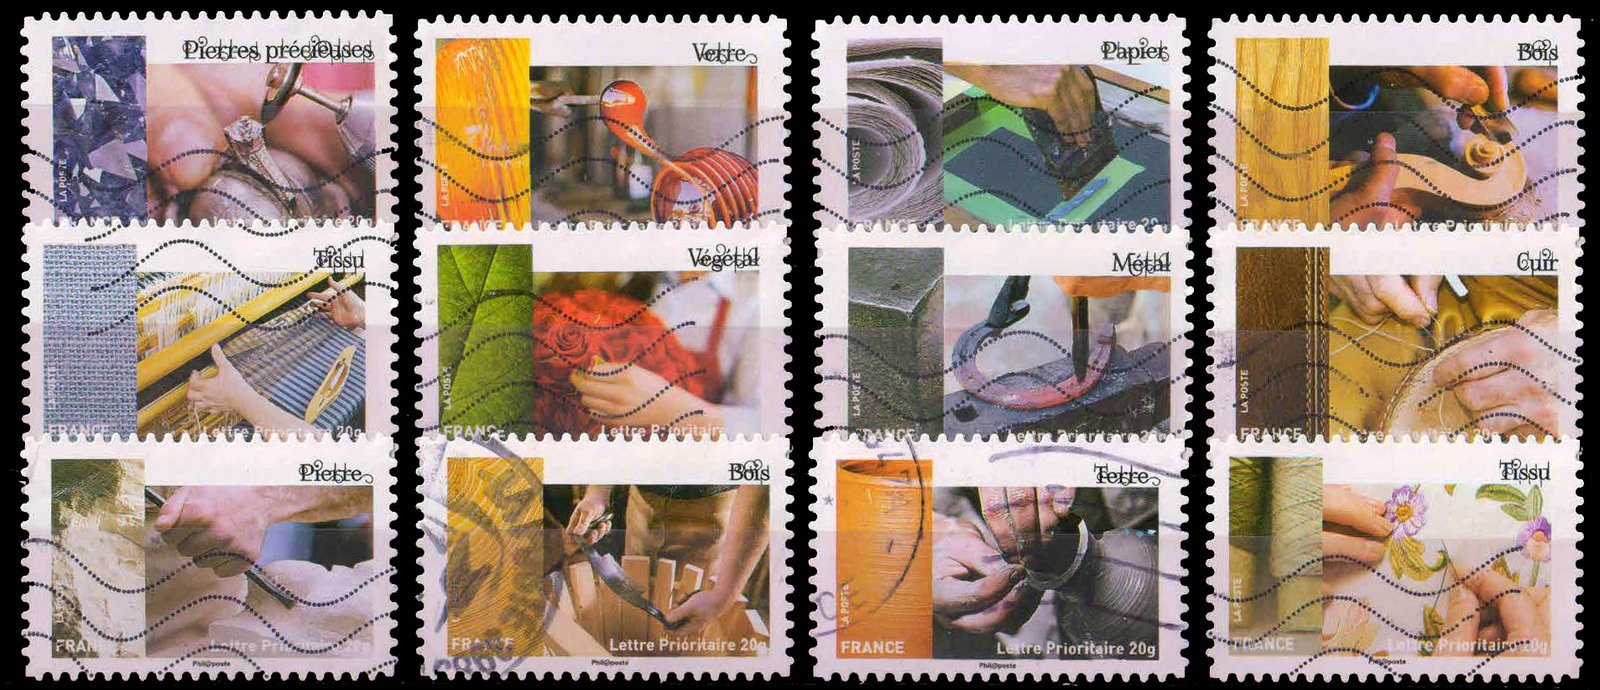 FRANCE 2015 - Arts & Materials, Patterns, Woodwork, Metalwork, Used, Complete Set of 12, Cat £ 30-S.G. 5696-5707